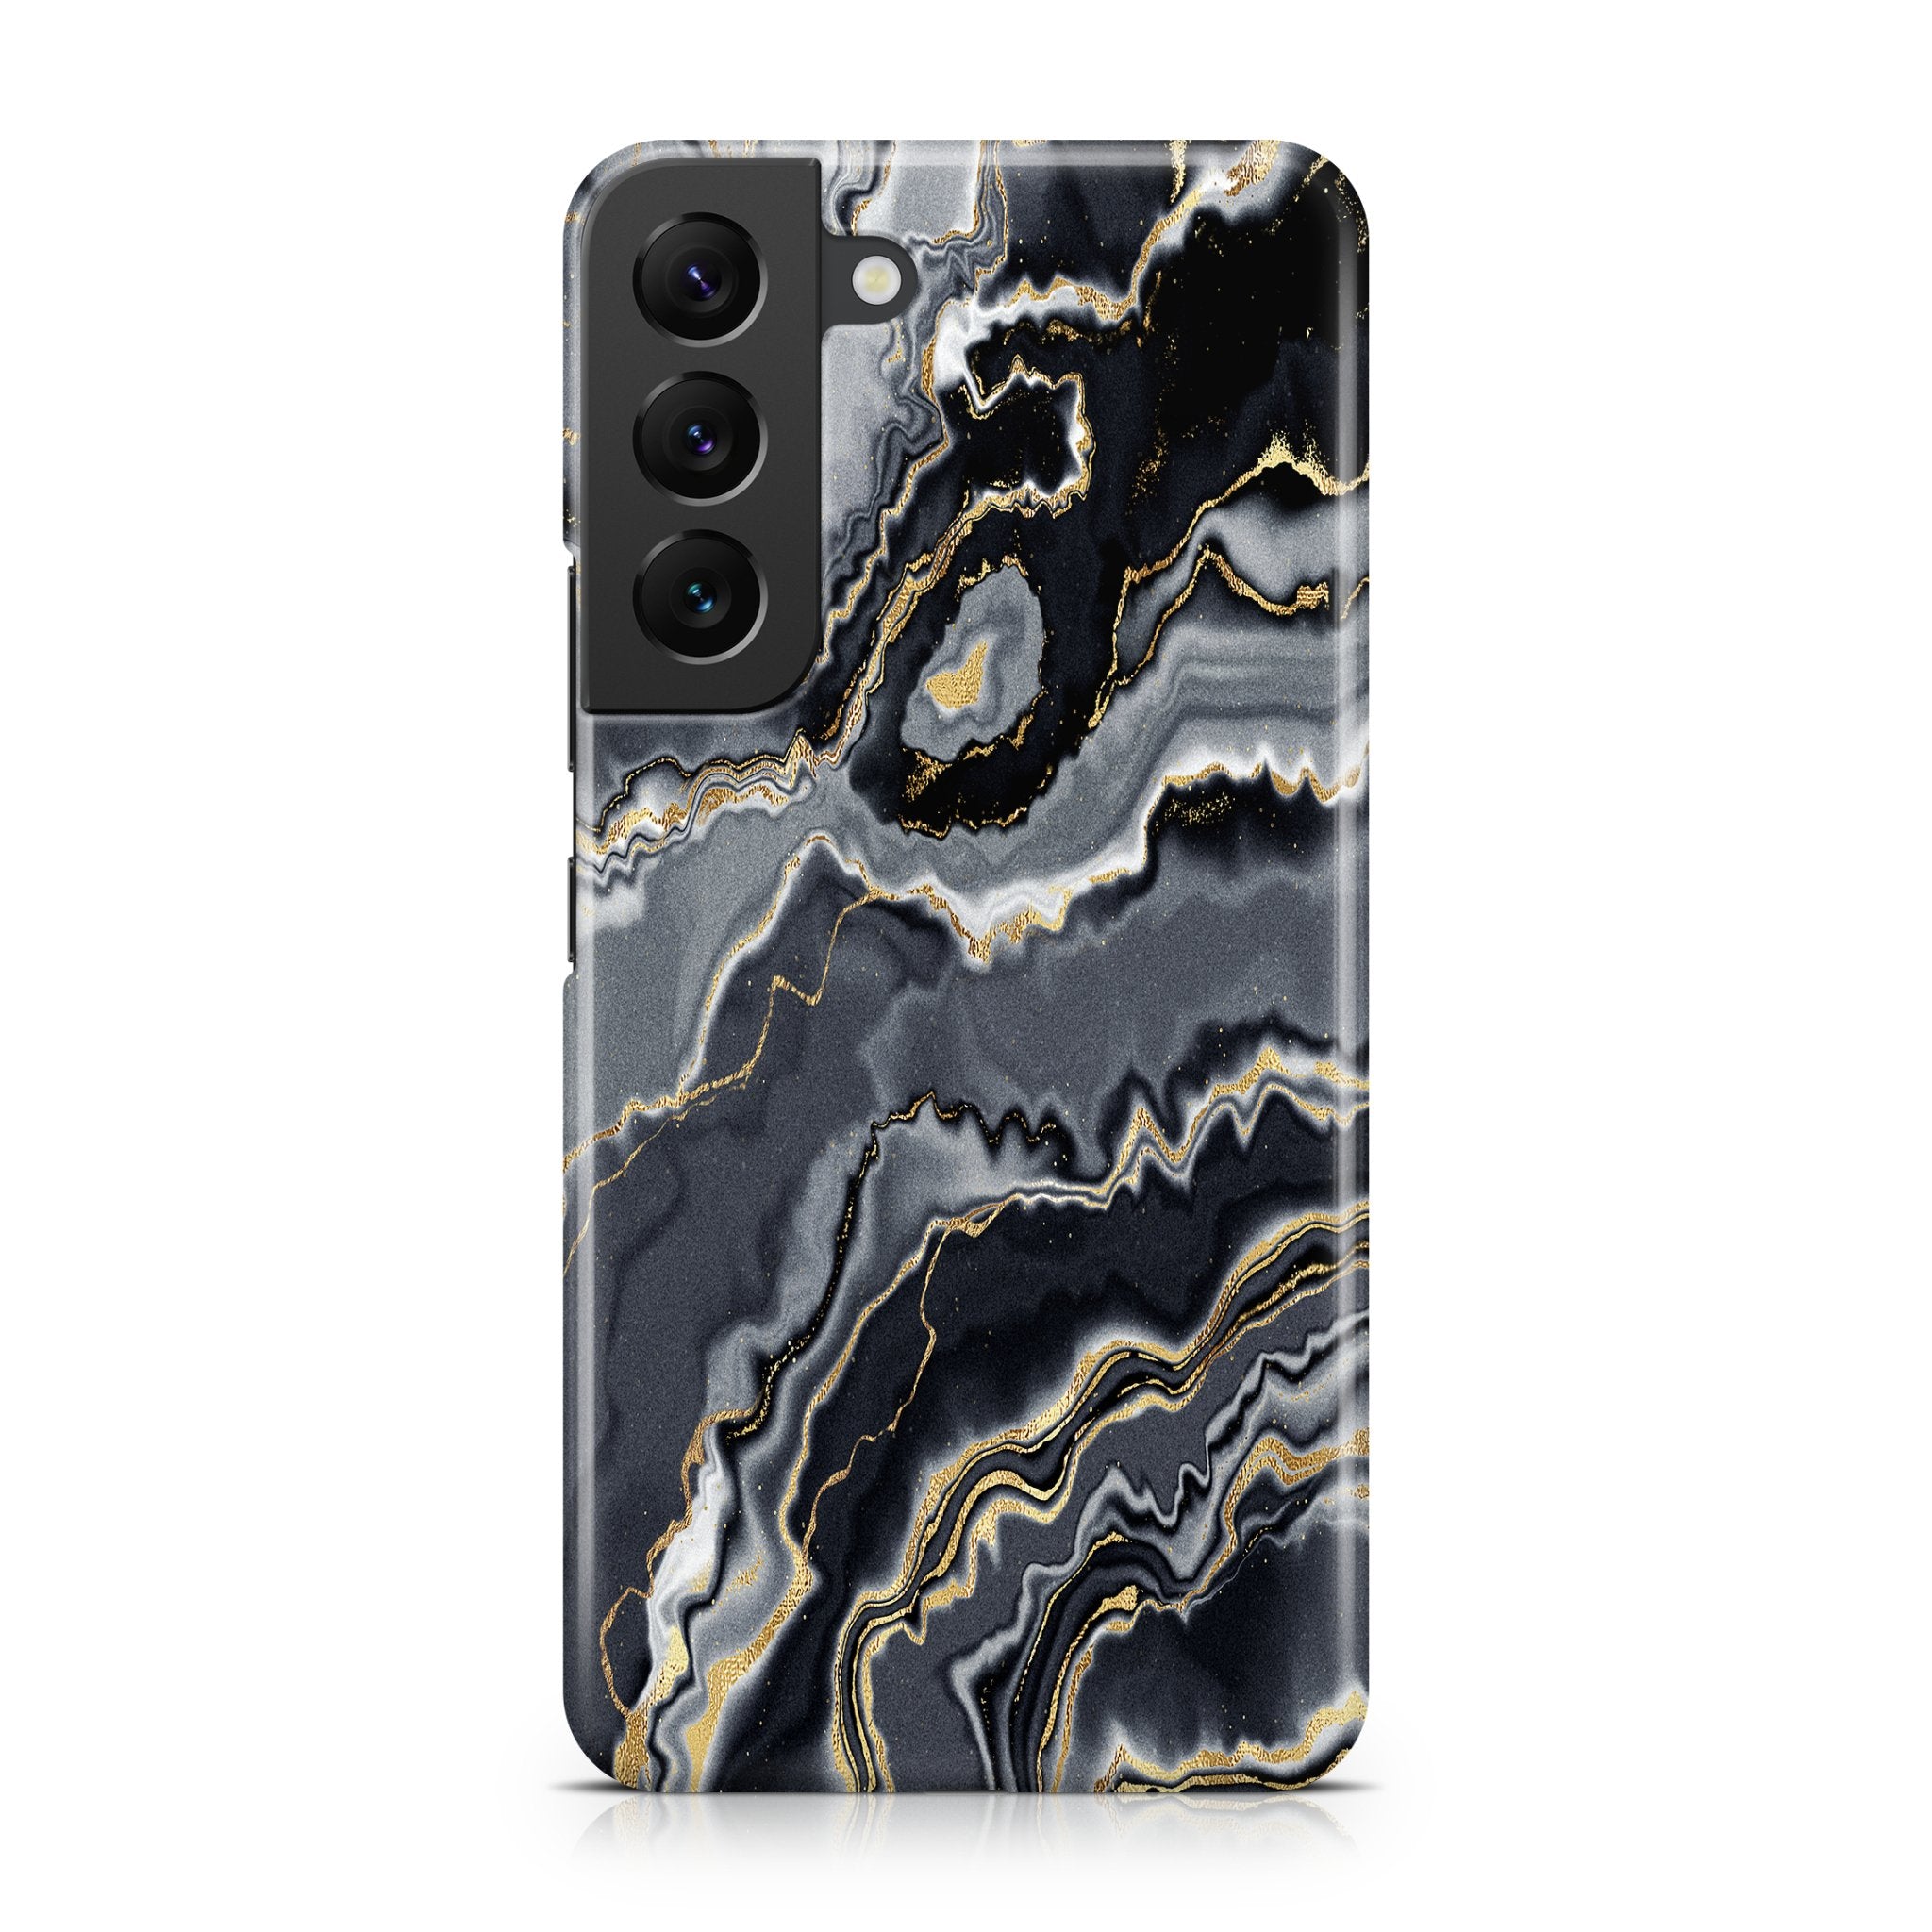 Grey & Gold Agate - Samsung phone case designs by CaseSwagger